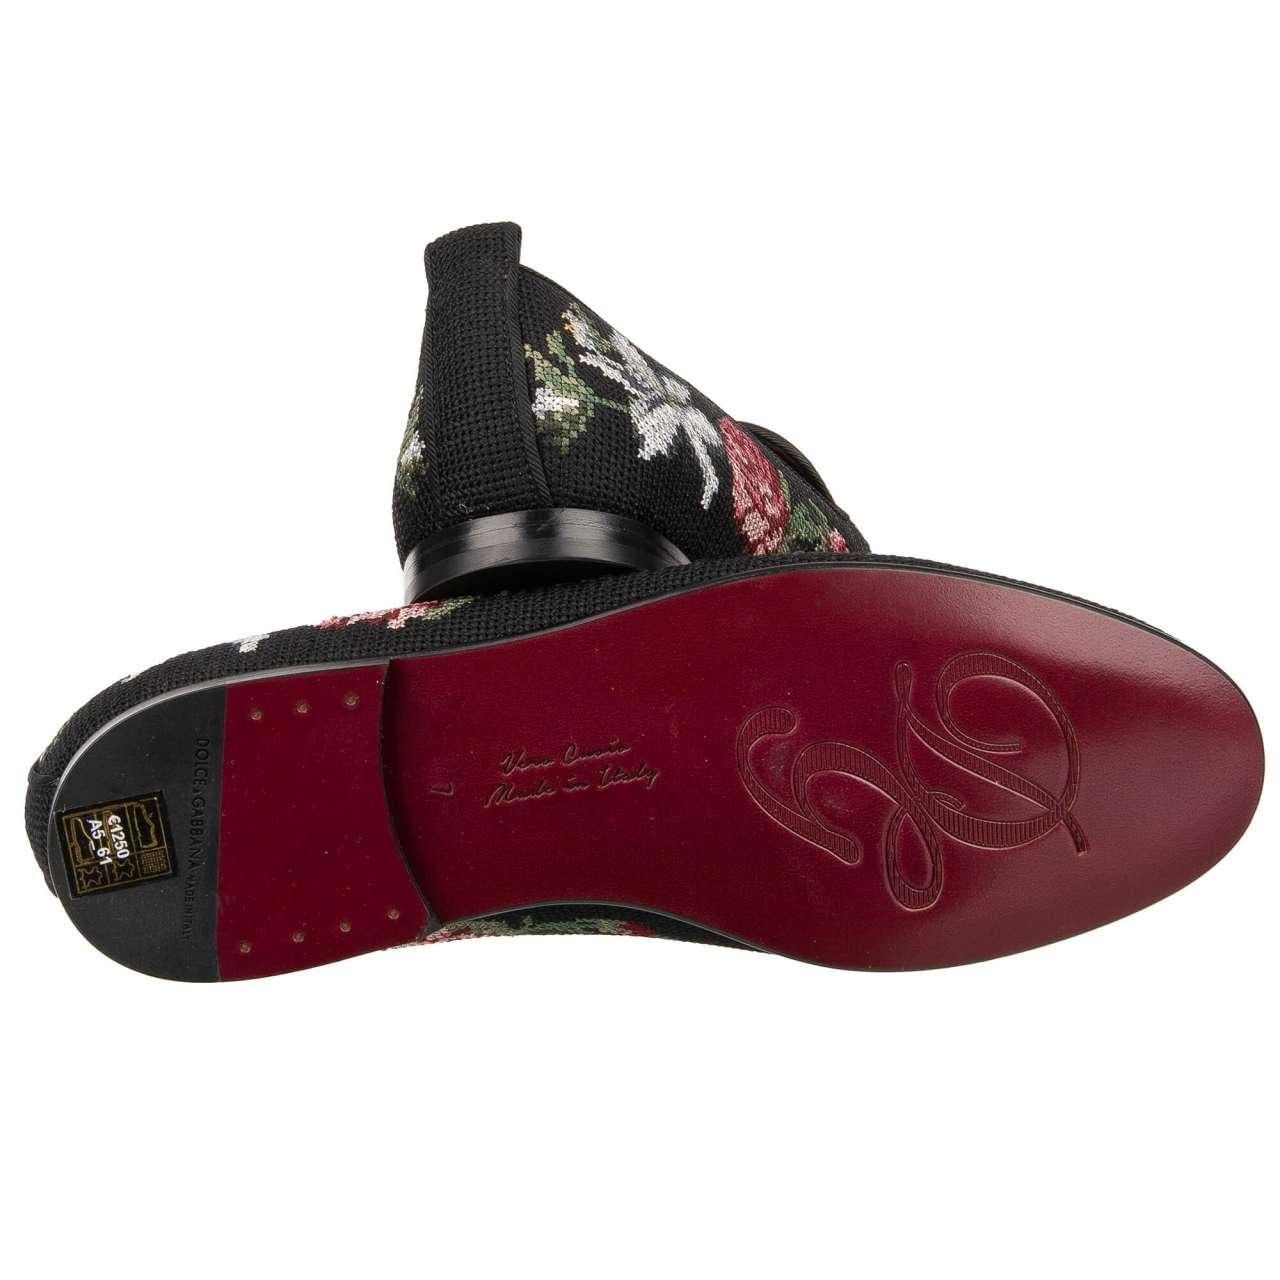 Dolce & Gabbana Baroque Crown Rose Angel Loafer YOUNG POPE Black EUR 42.5 For Sale 2